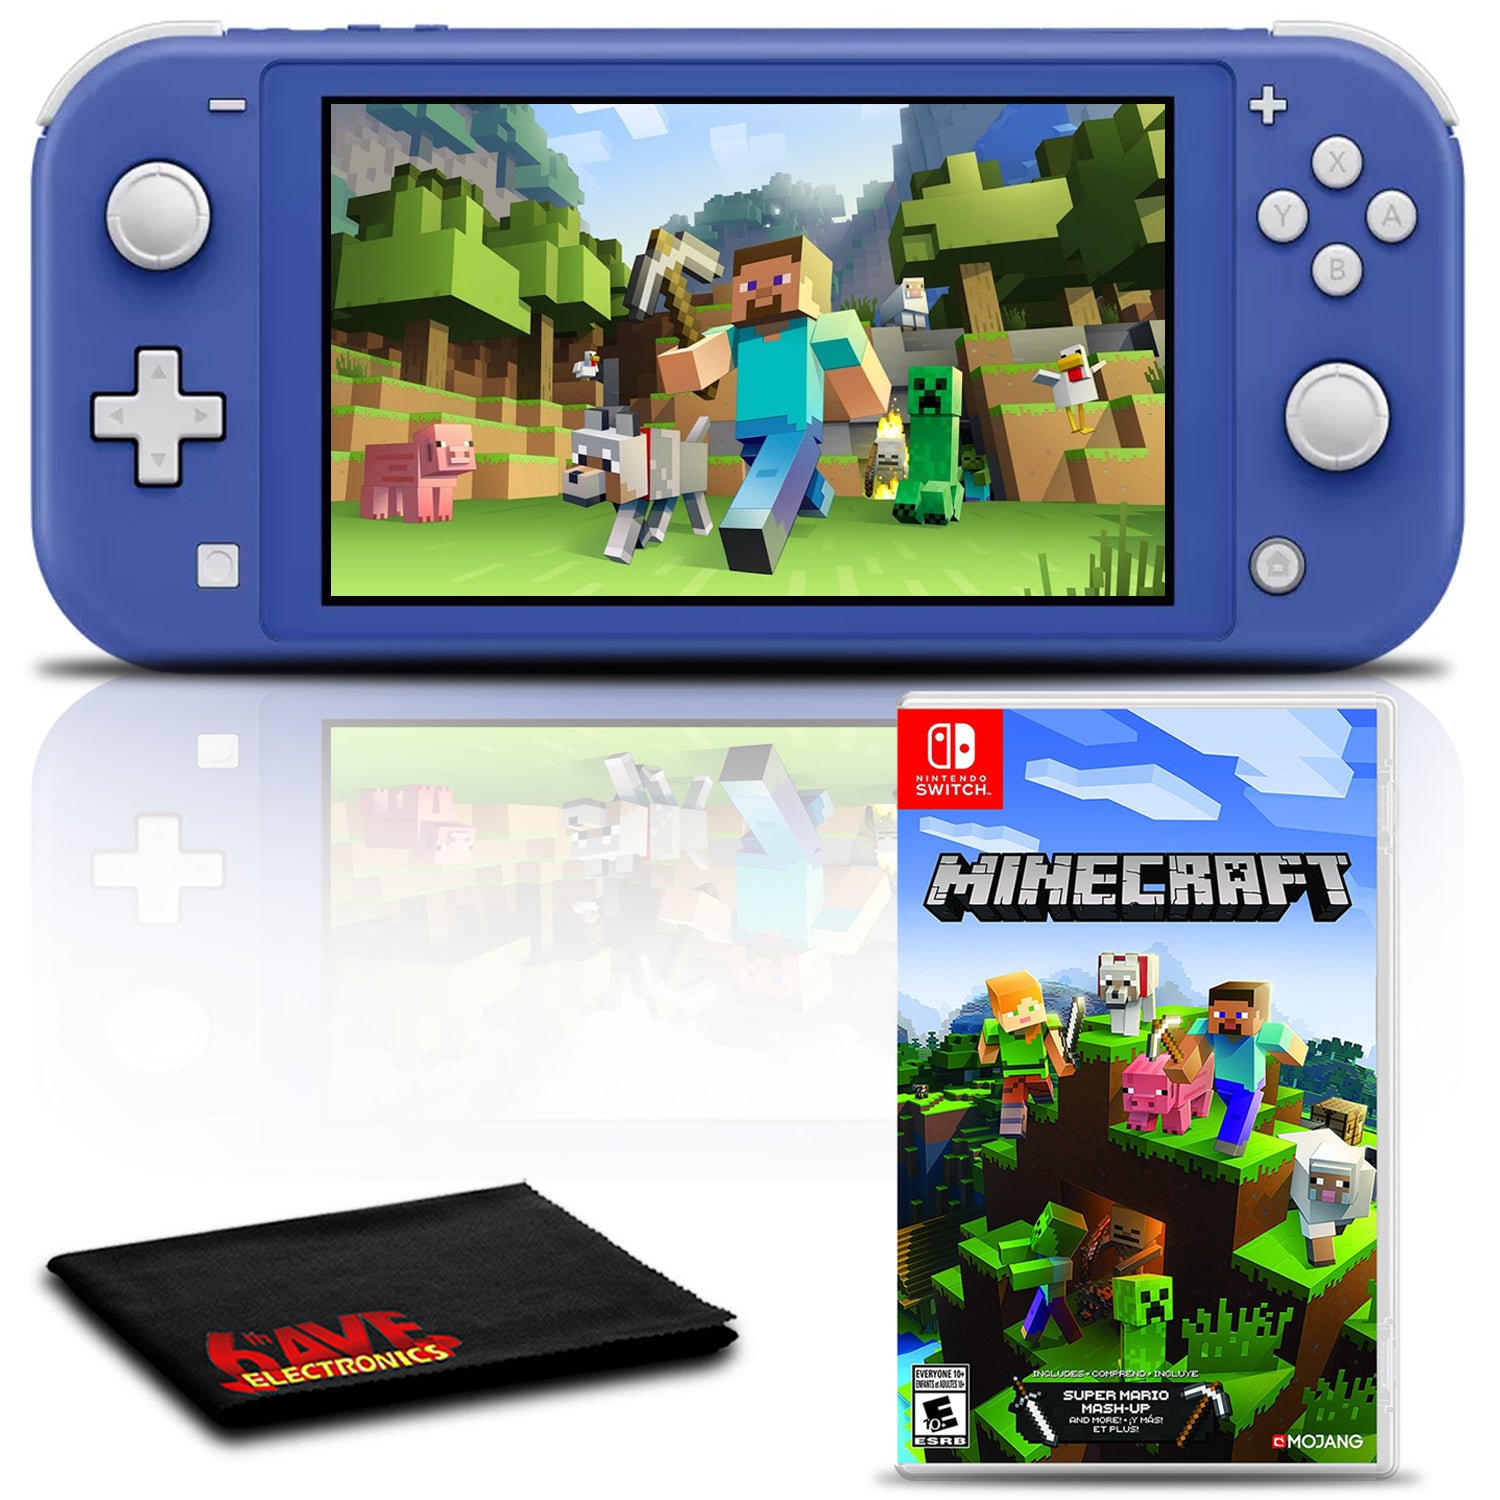 Nintendo Switch Lite 32GB Handheld Video Gaming Console with Minecraft